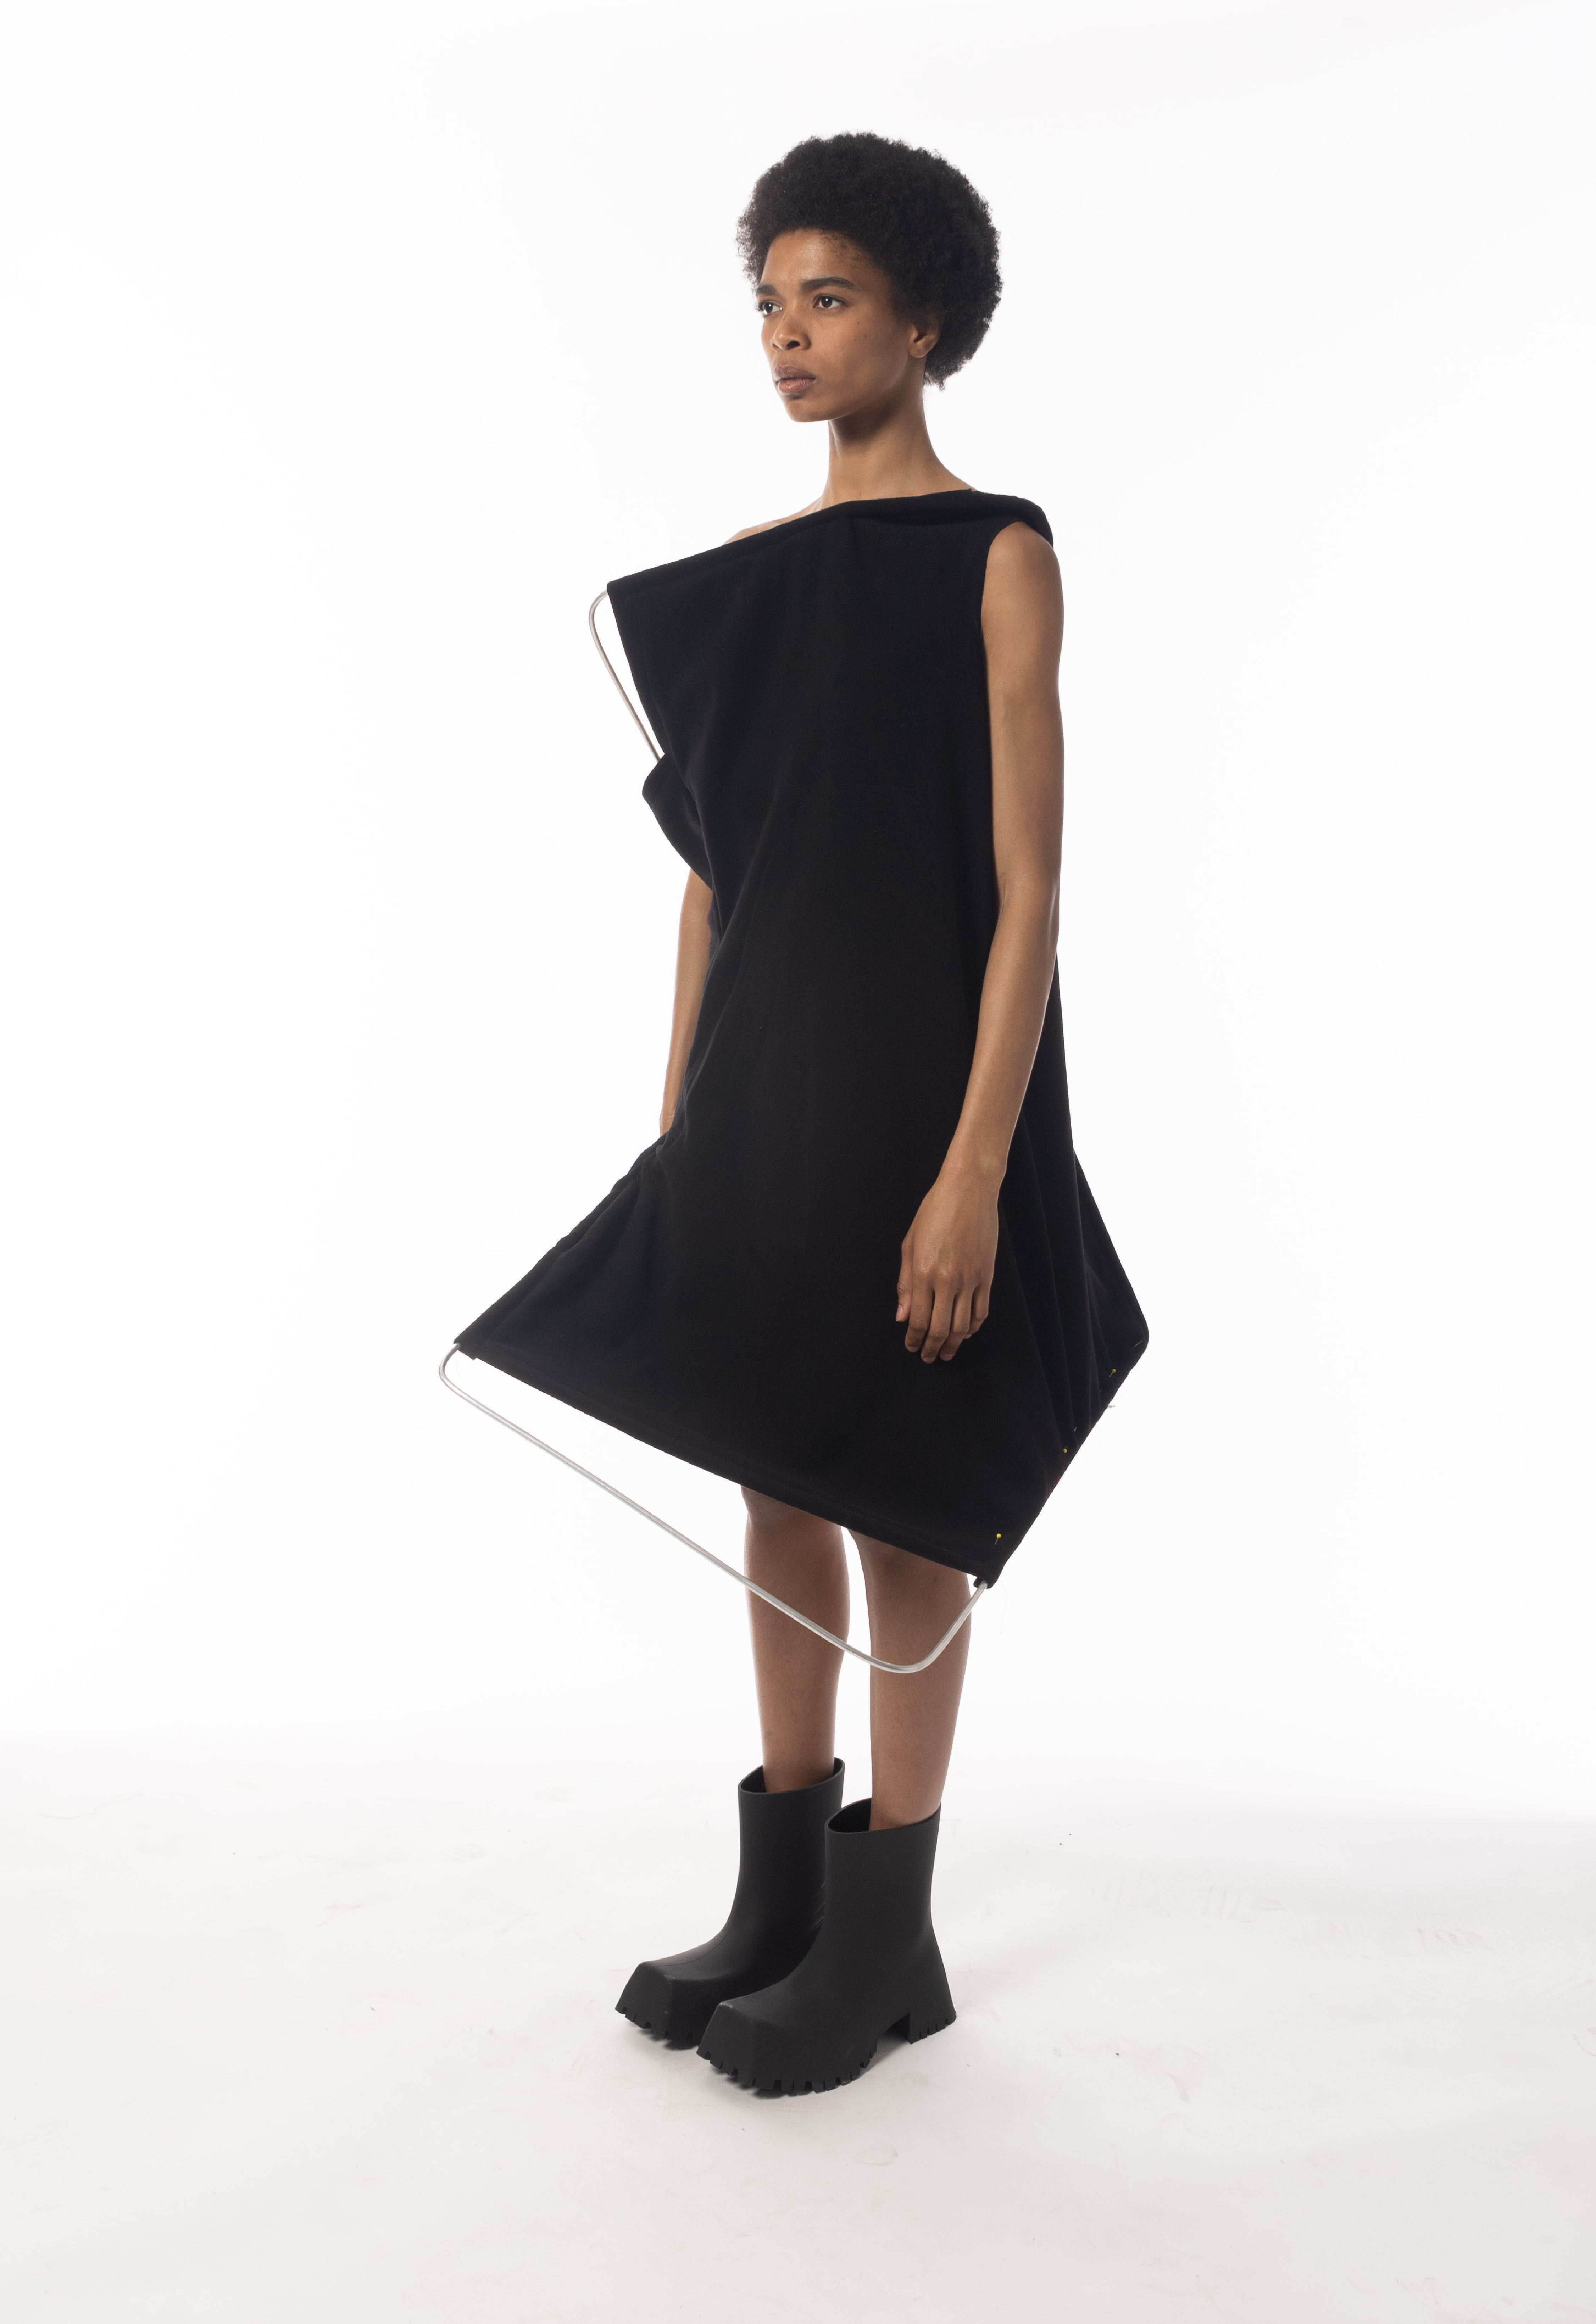 Front view of a woman wearing a Mid-century interior-inspired, black foldable knee-length wool dress with a metal frame stretching the structure. The model is wearing black boots. The background is white.